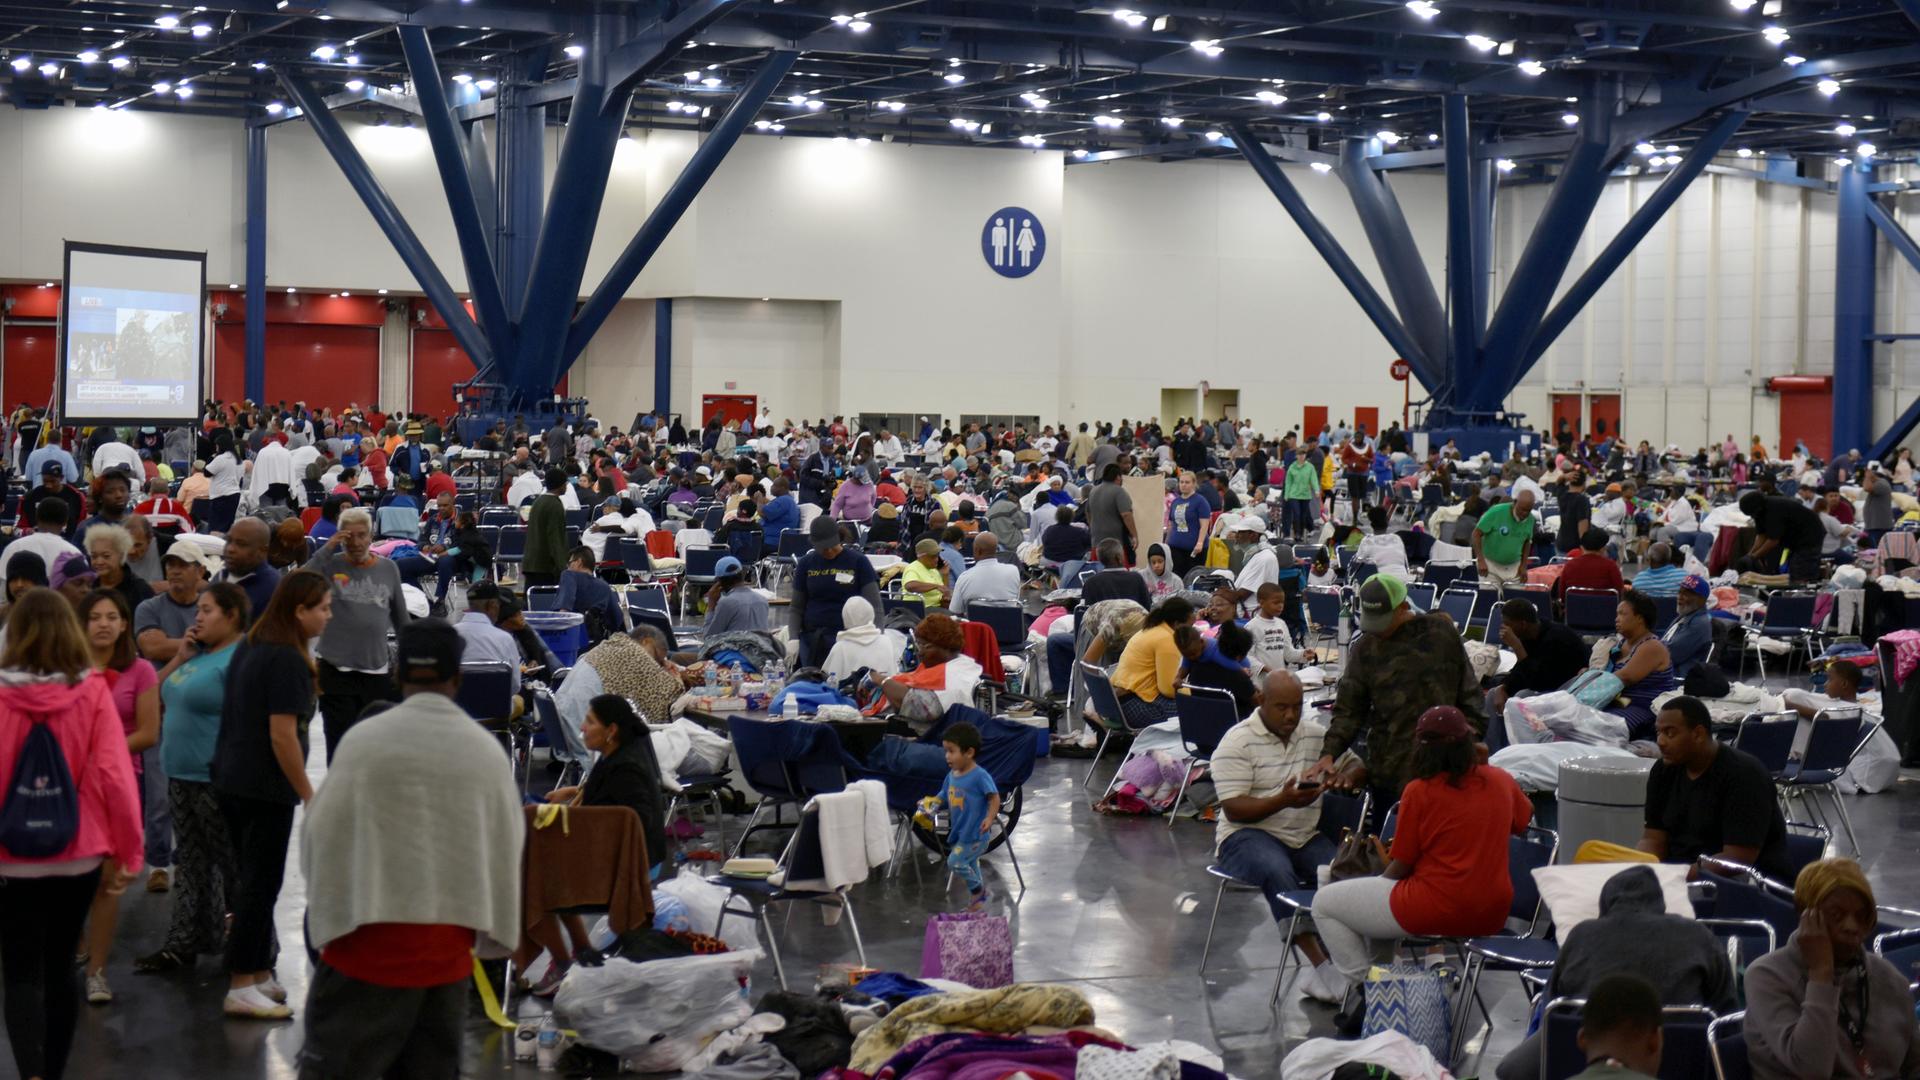 Hundreds of people are gathered in a room. Some are seated at tables and have water bottles, some pillow or blankets with them. A large screen is set up to broadcast news about Tropical Storm Harvey.